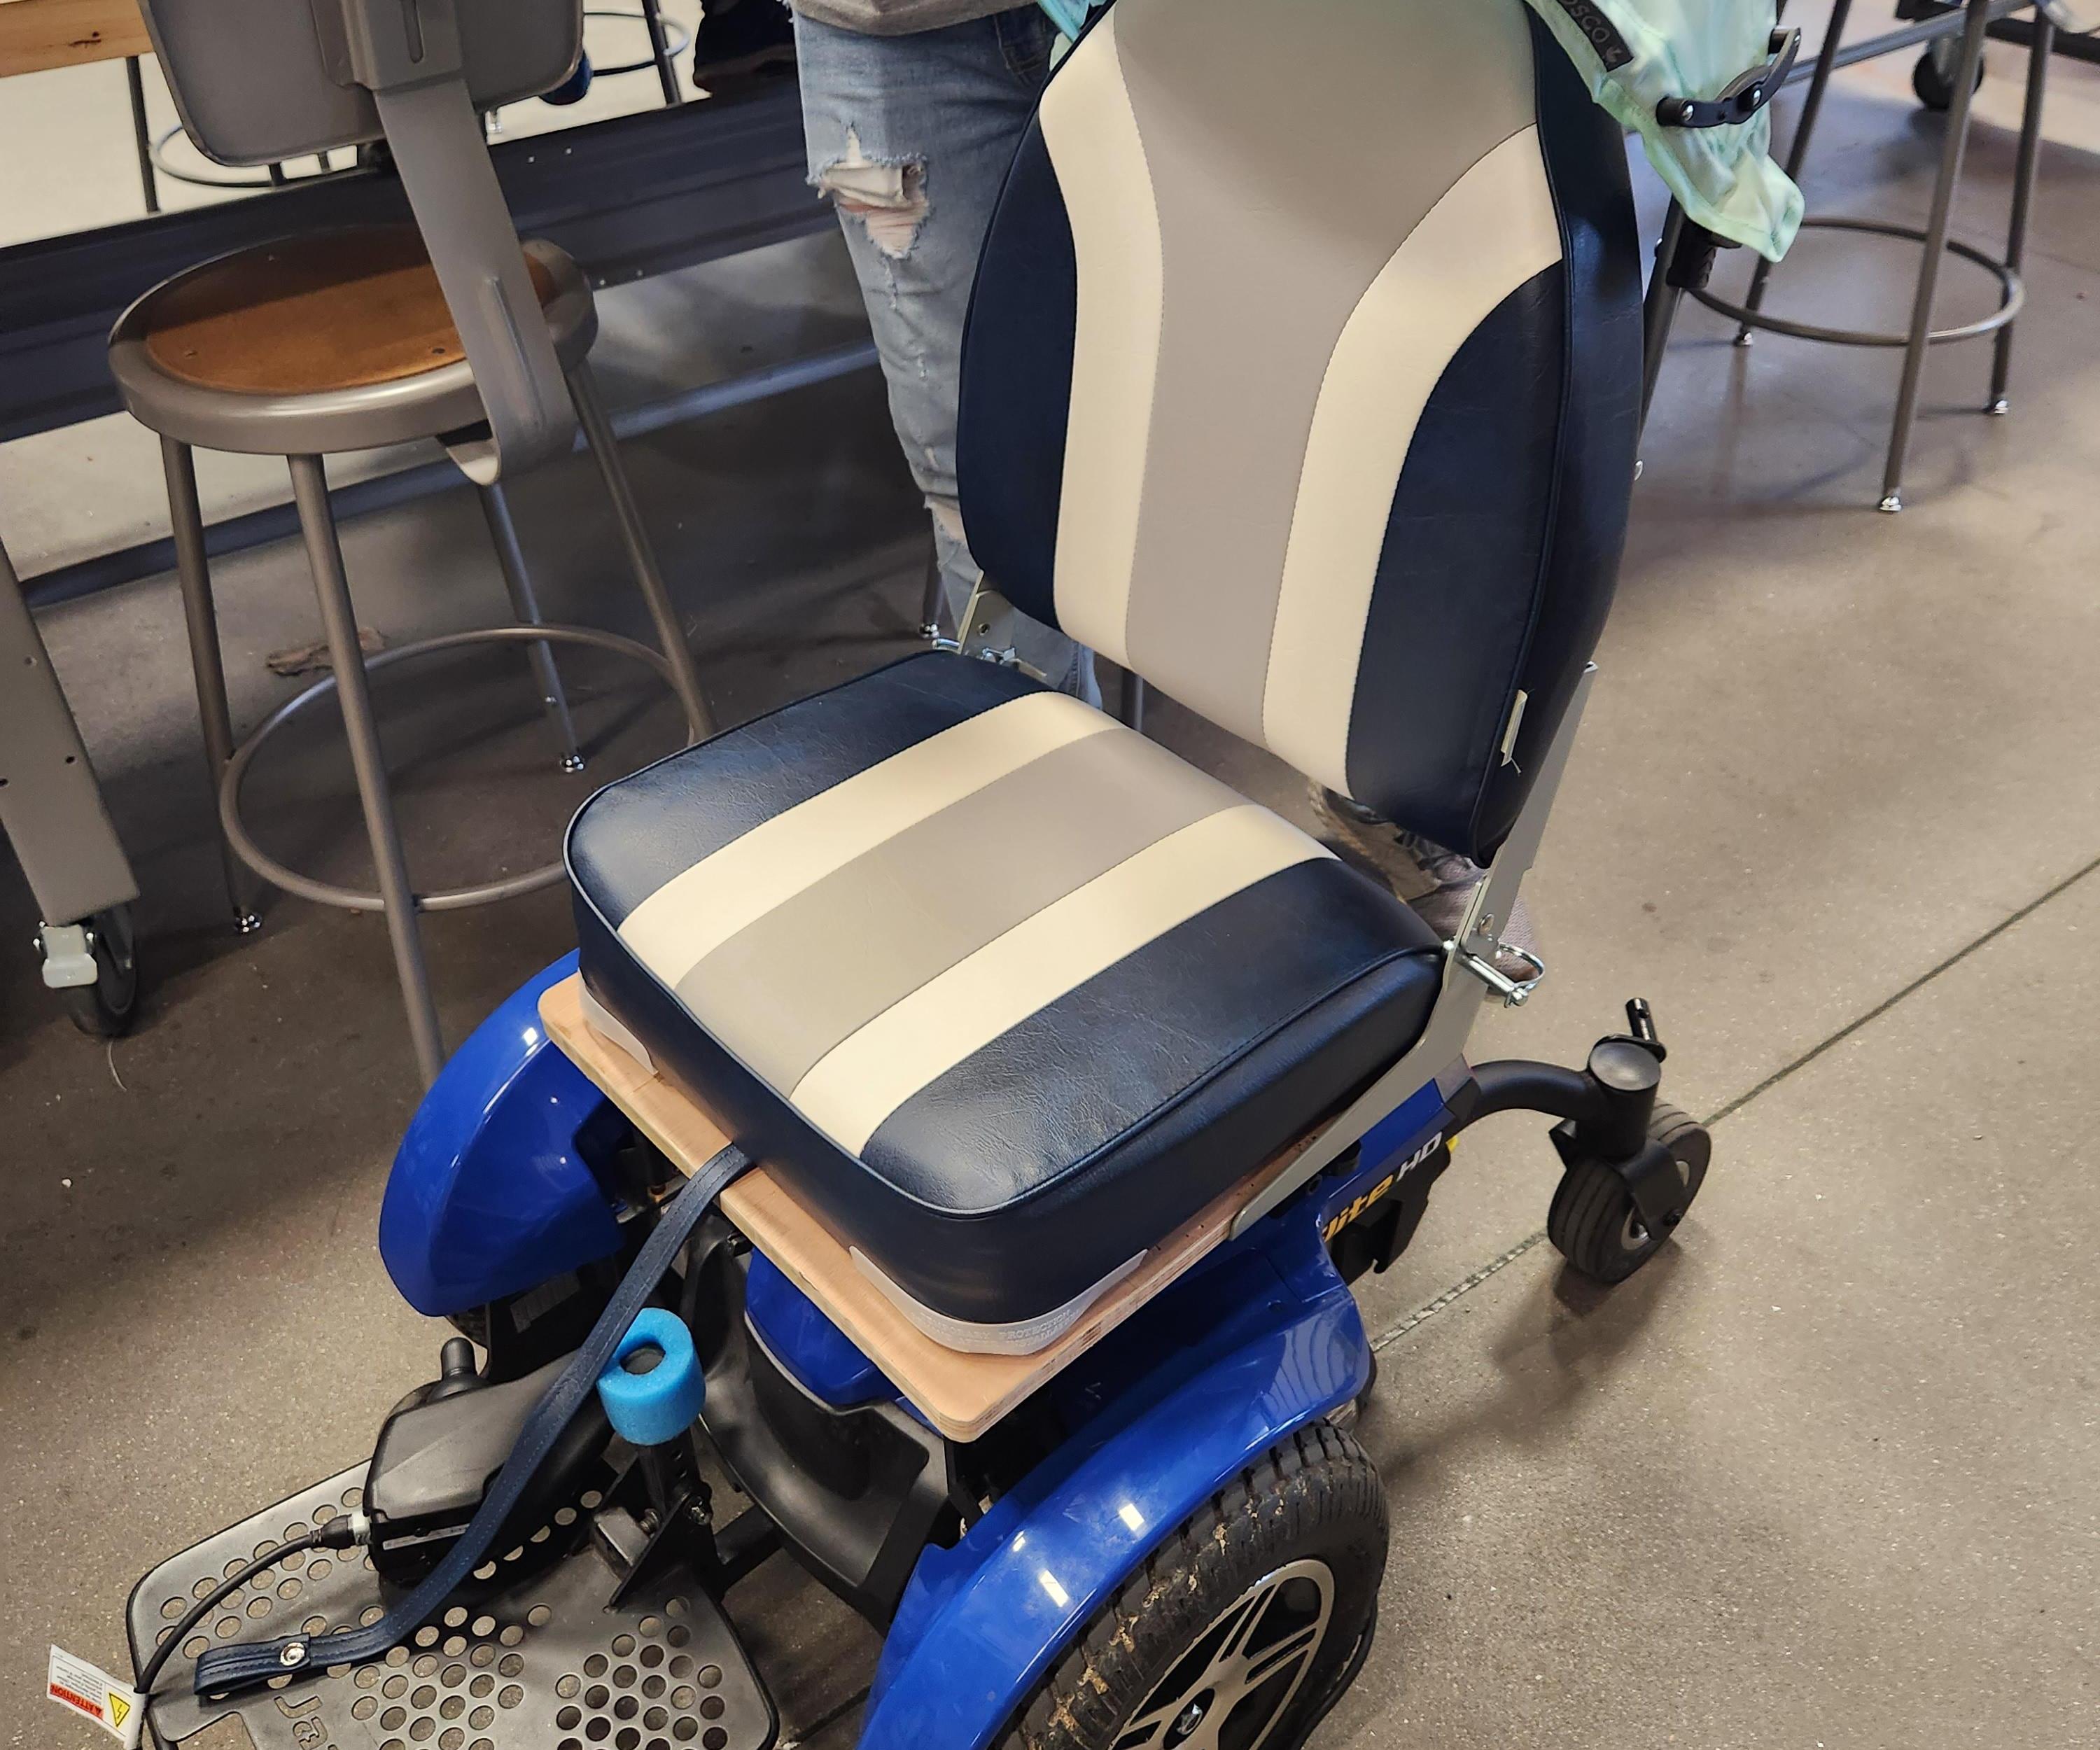 Modifying an Adult Mobility Scooter Into an All-terrain Wheelchair for a Child